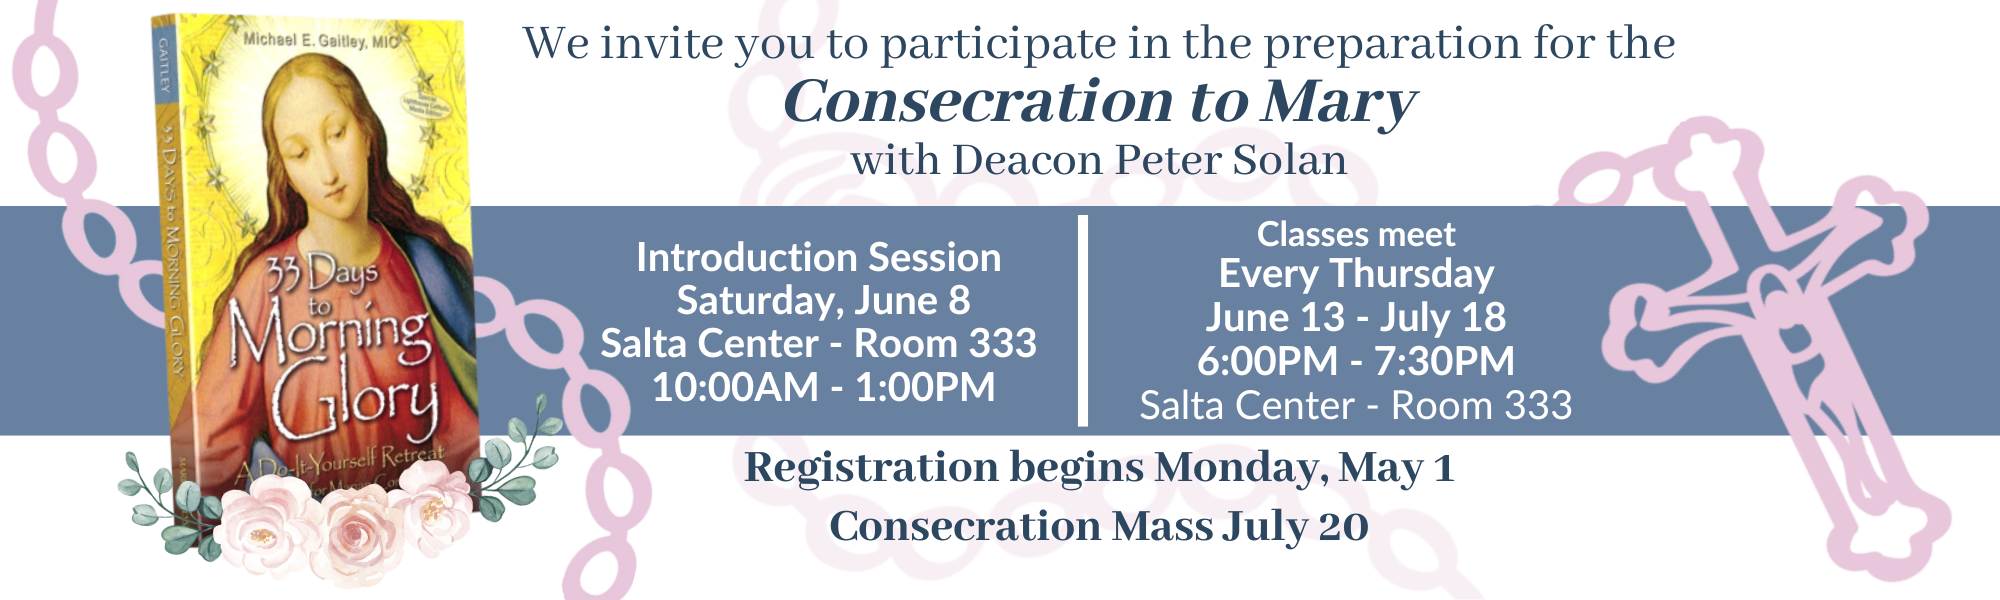 Consecration to Mary with Dcn Peter Solan Thursdays June 13-July 18 6PM